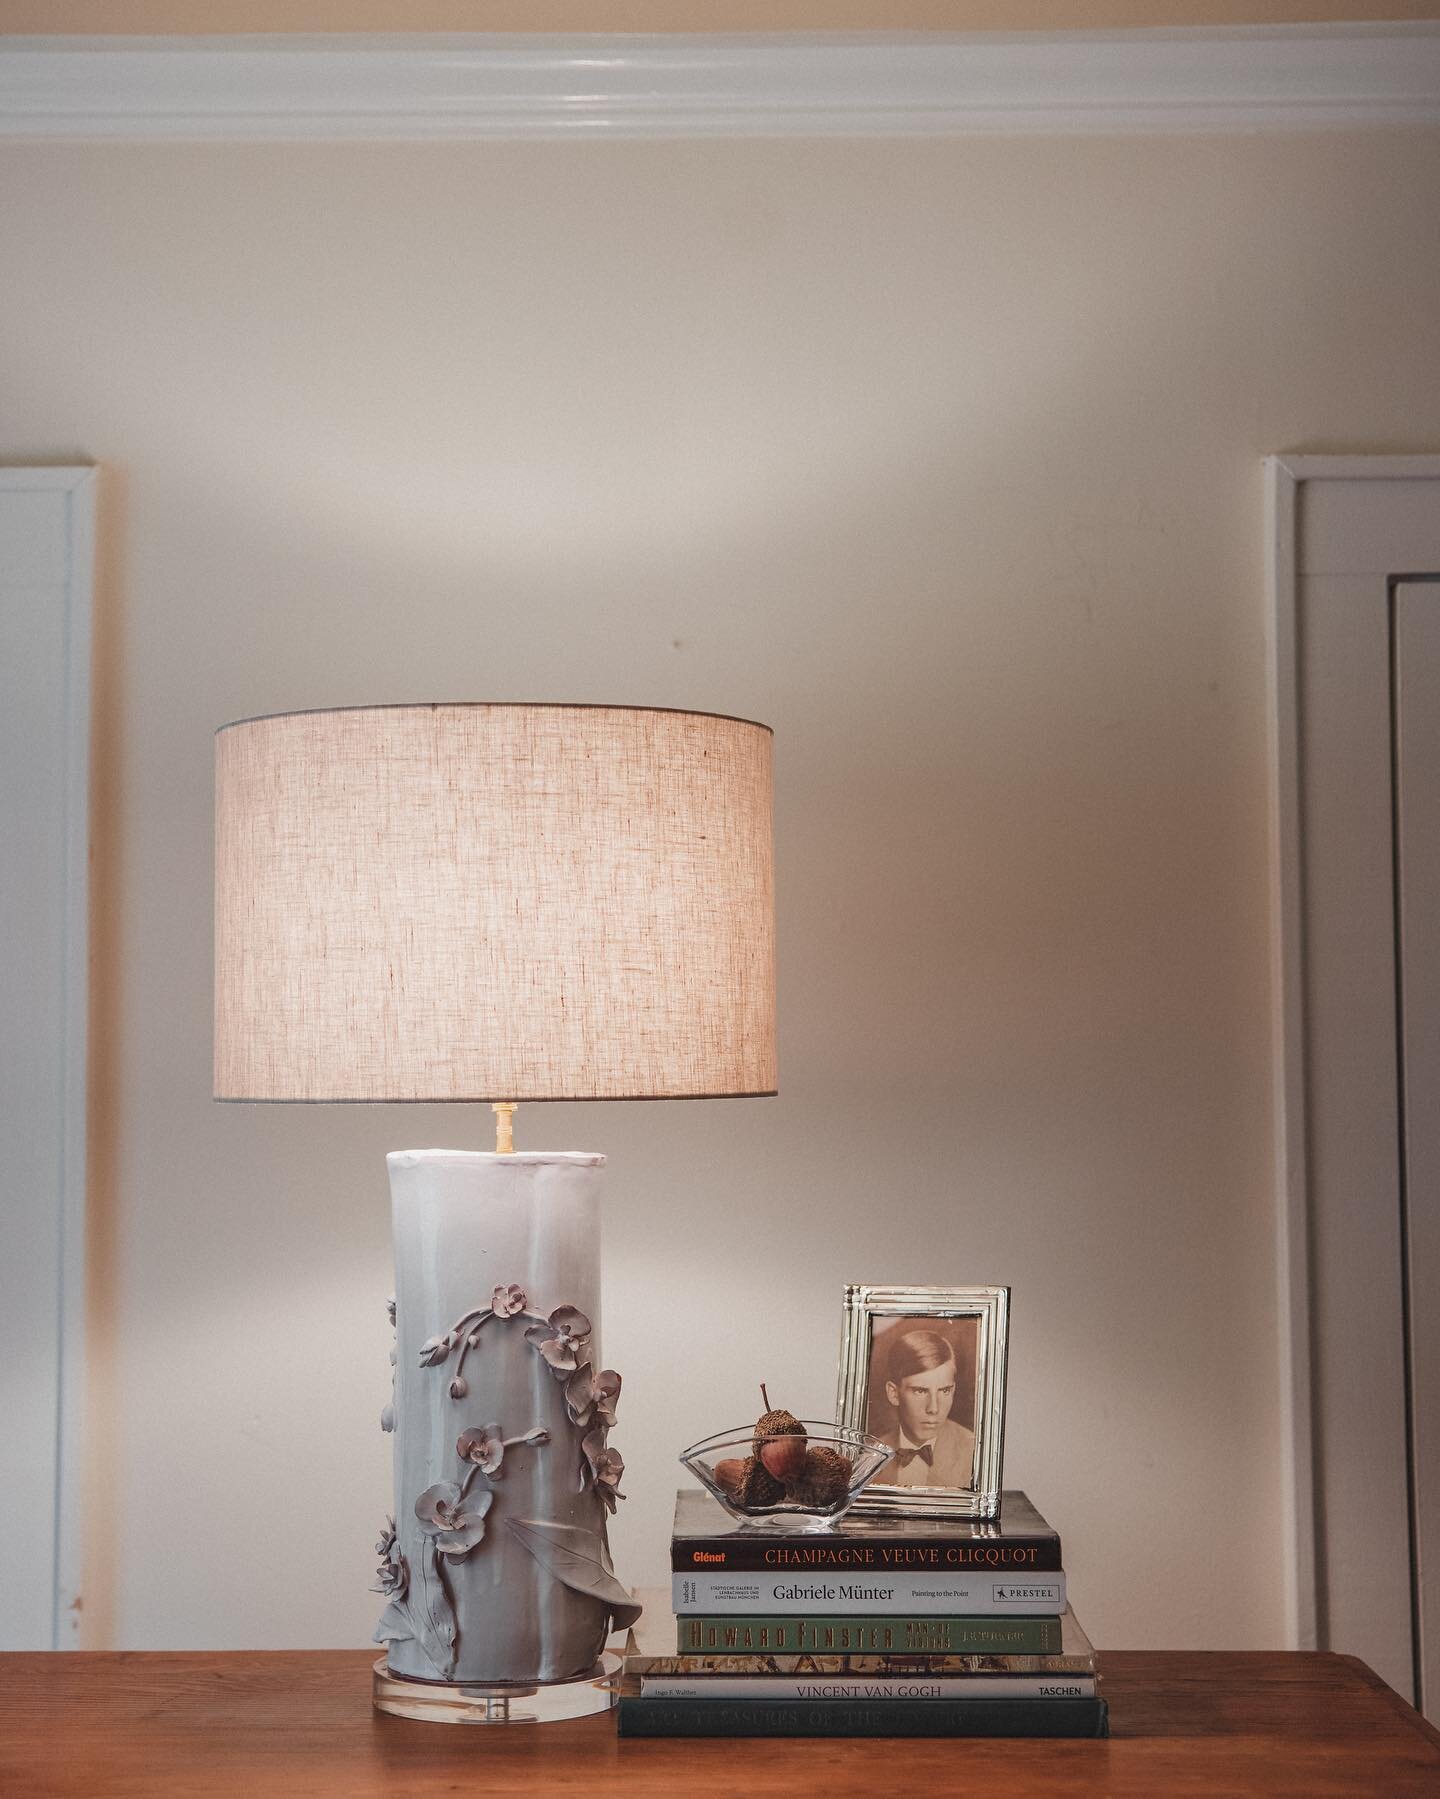 We love seeing our lamps in your homes&hellip; and hope you love it just as much. Let us know if we can help you light up your space!